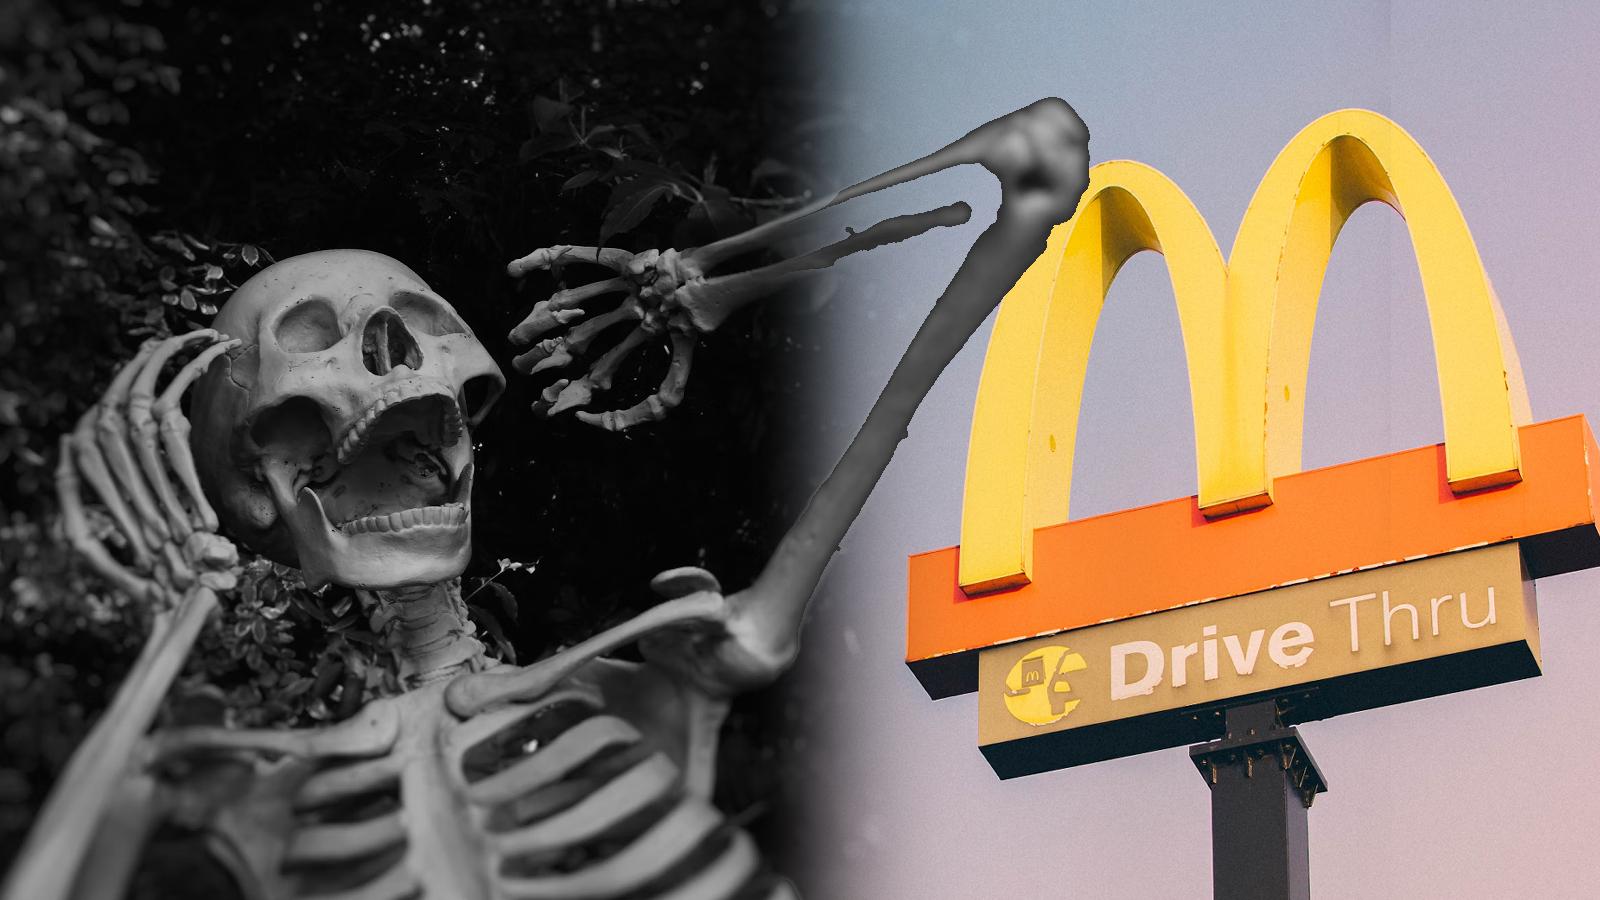 Skeleton and McDonald's sign